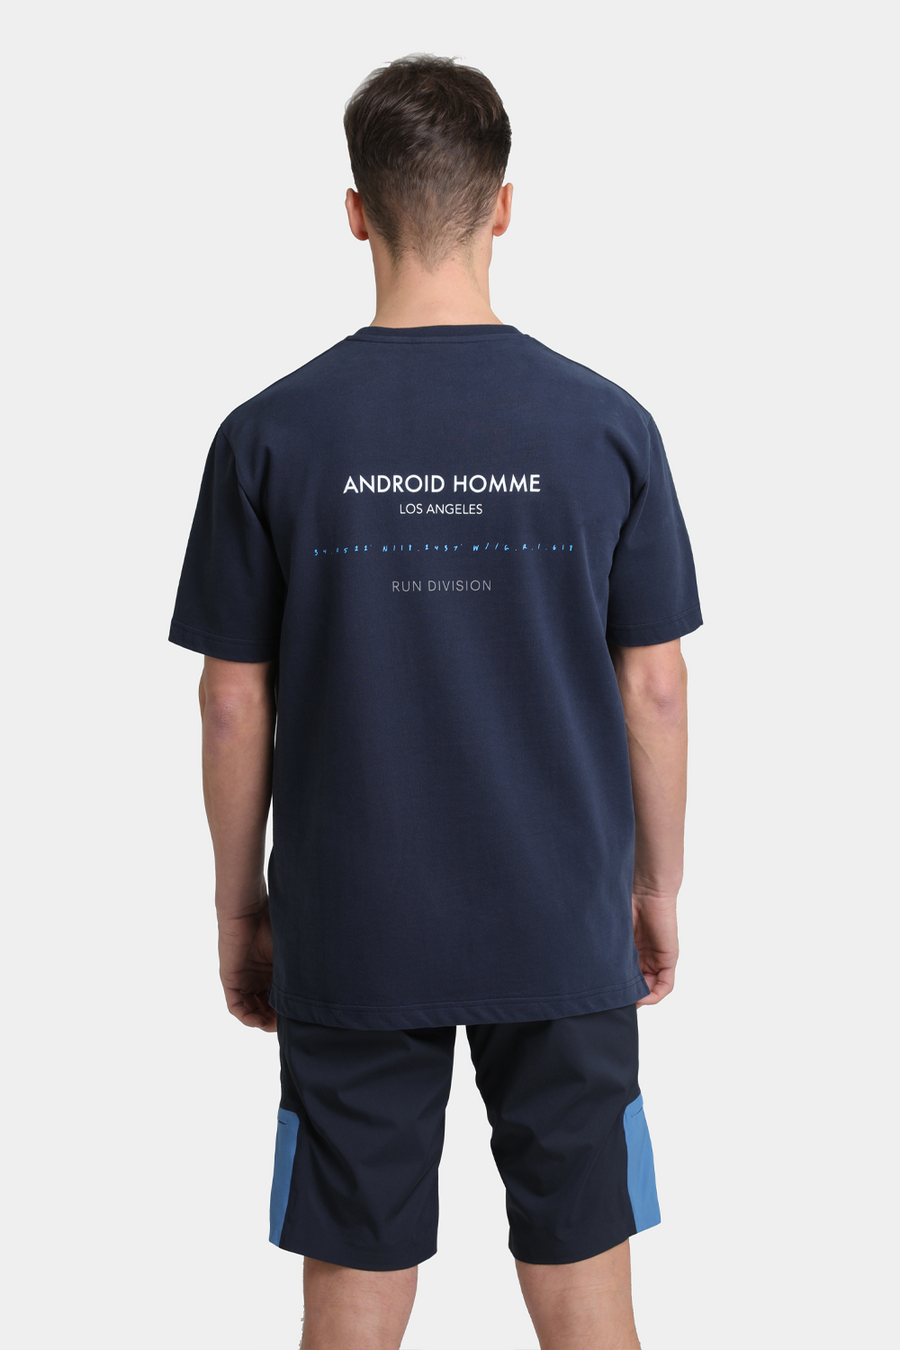 Buy the Android Homme Run Division T-Shirt in Navy at Intro. Spend £50 for free UK delivery. Official stockists. We ship worldwide.